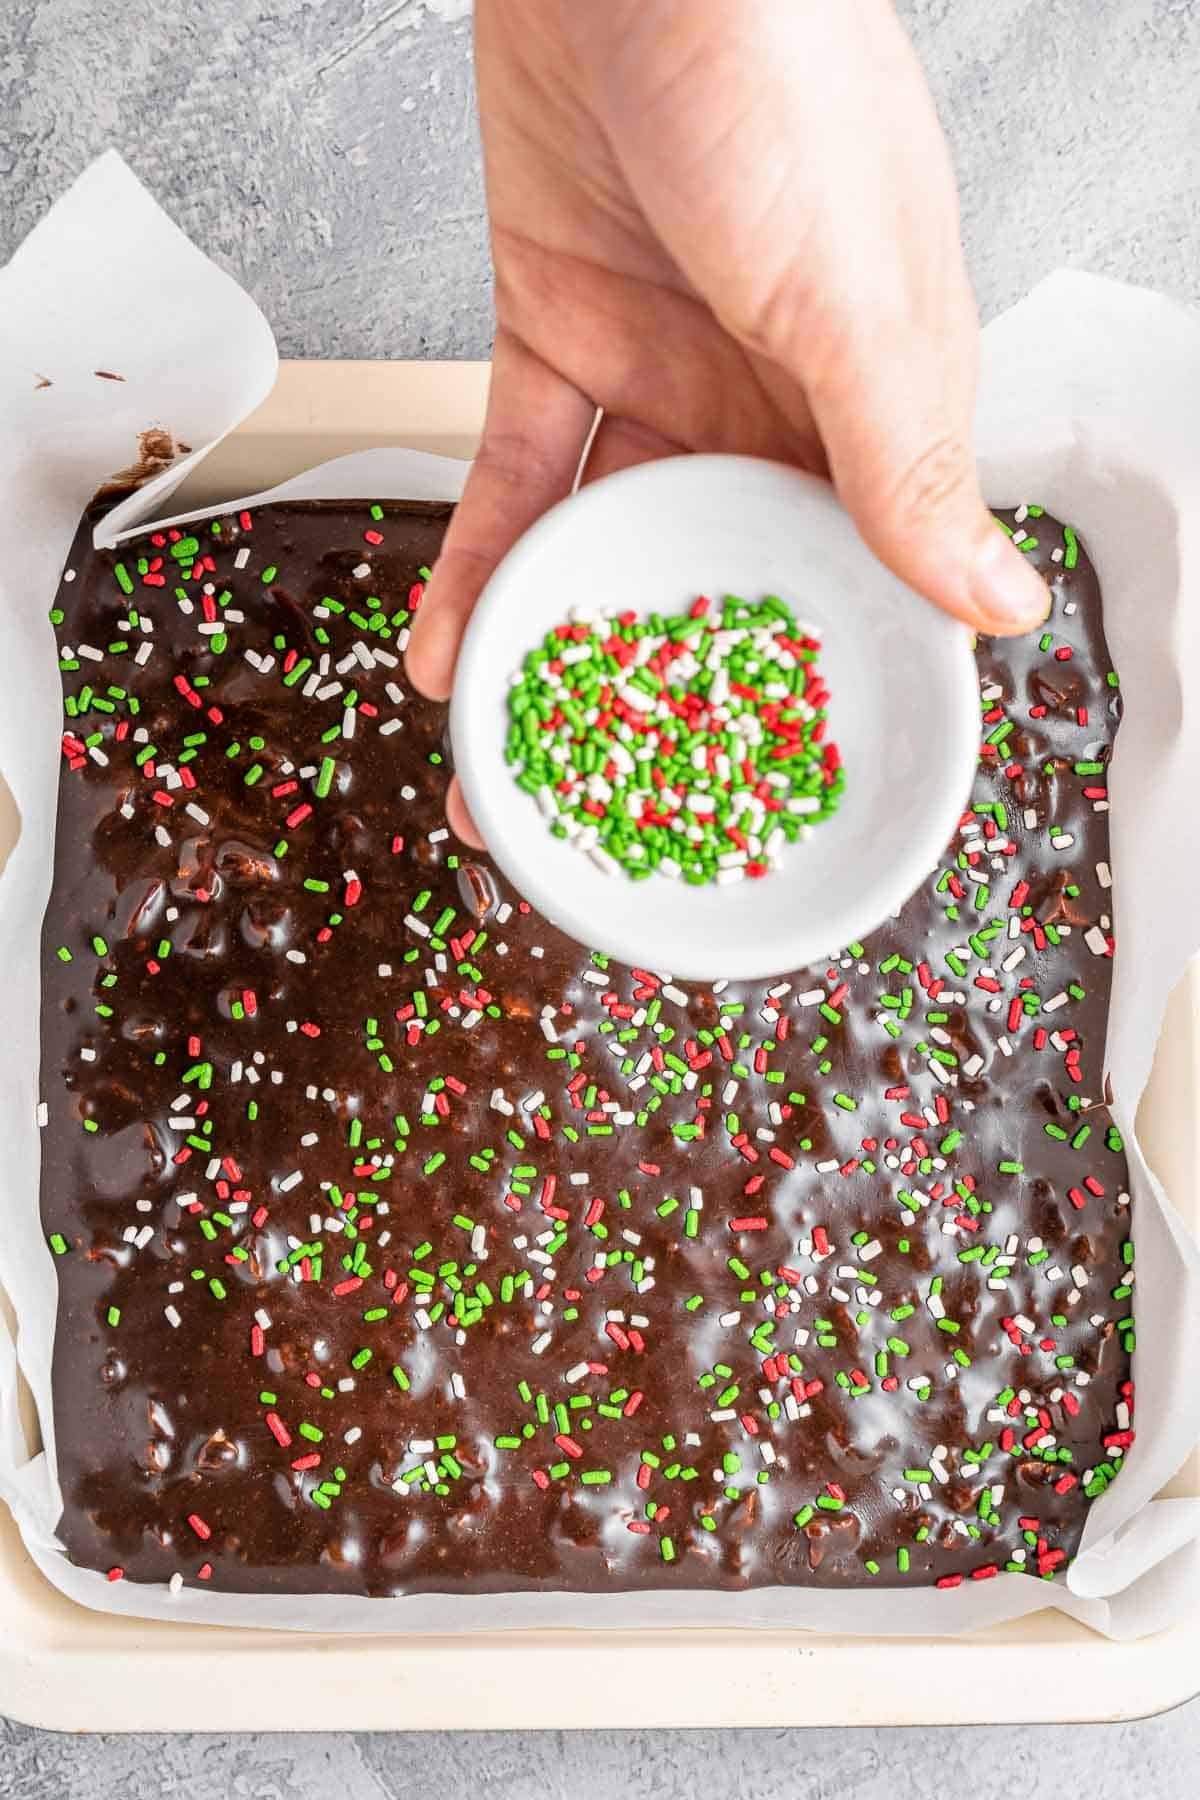 A hand sprinkling holiday colored sprinkles over chocolate fudge in a square baking dish.